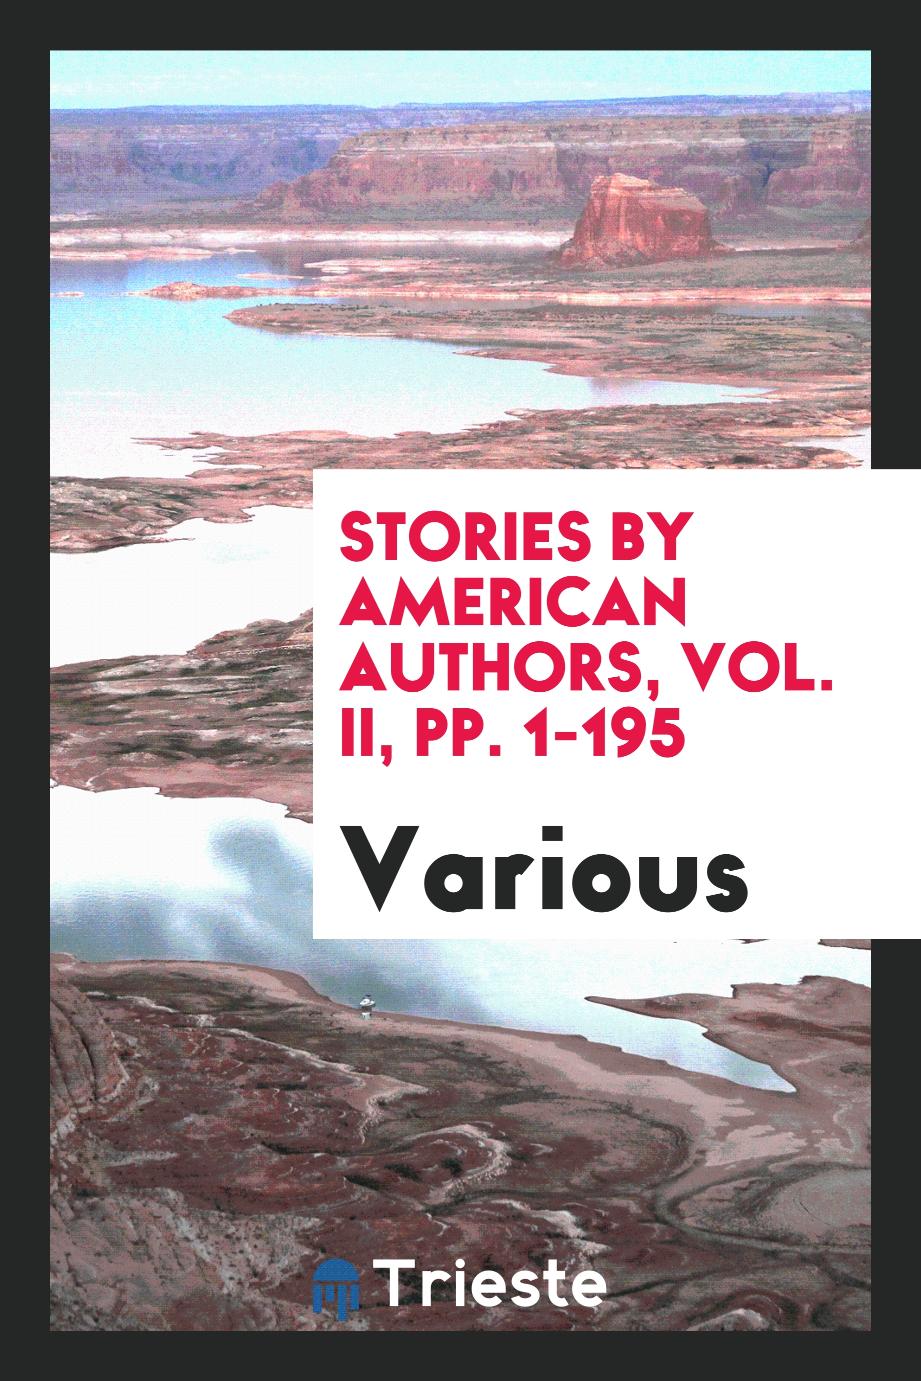 Stories by American Authors, Vol. II, pp. 1-195